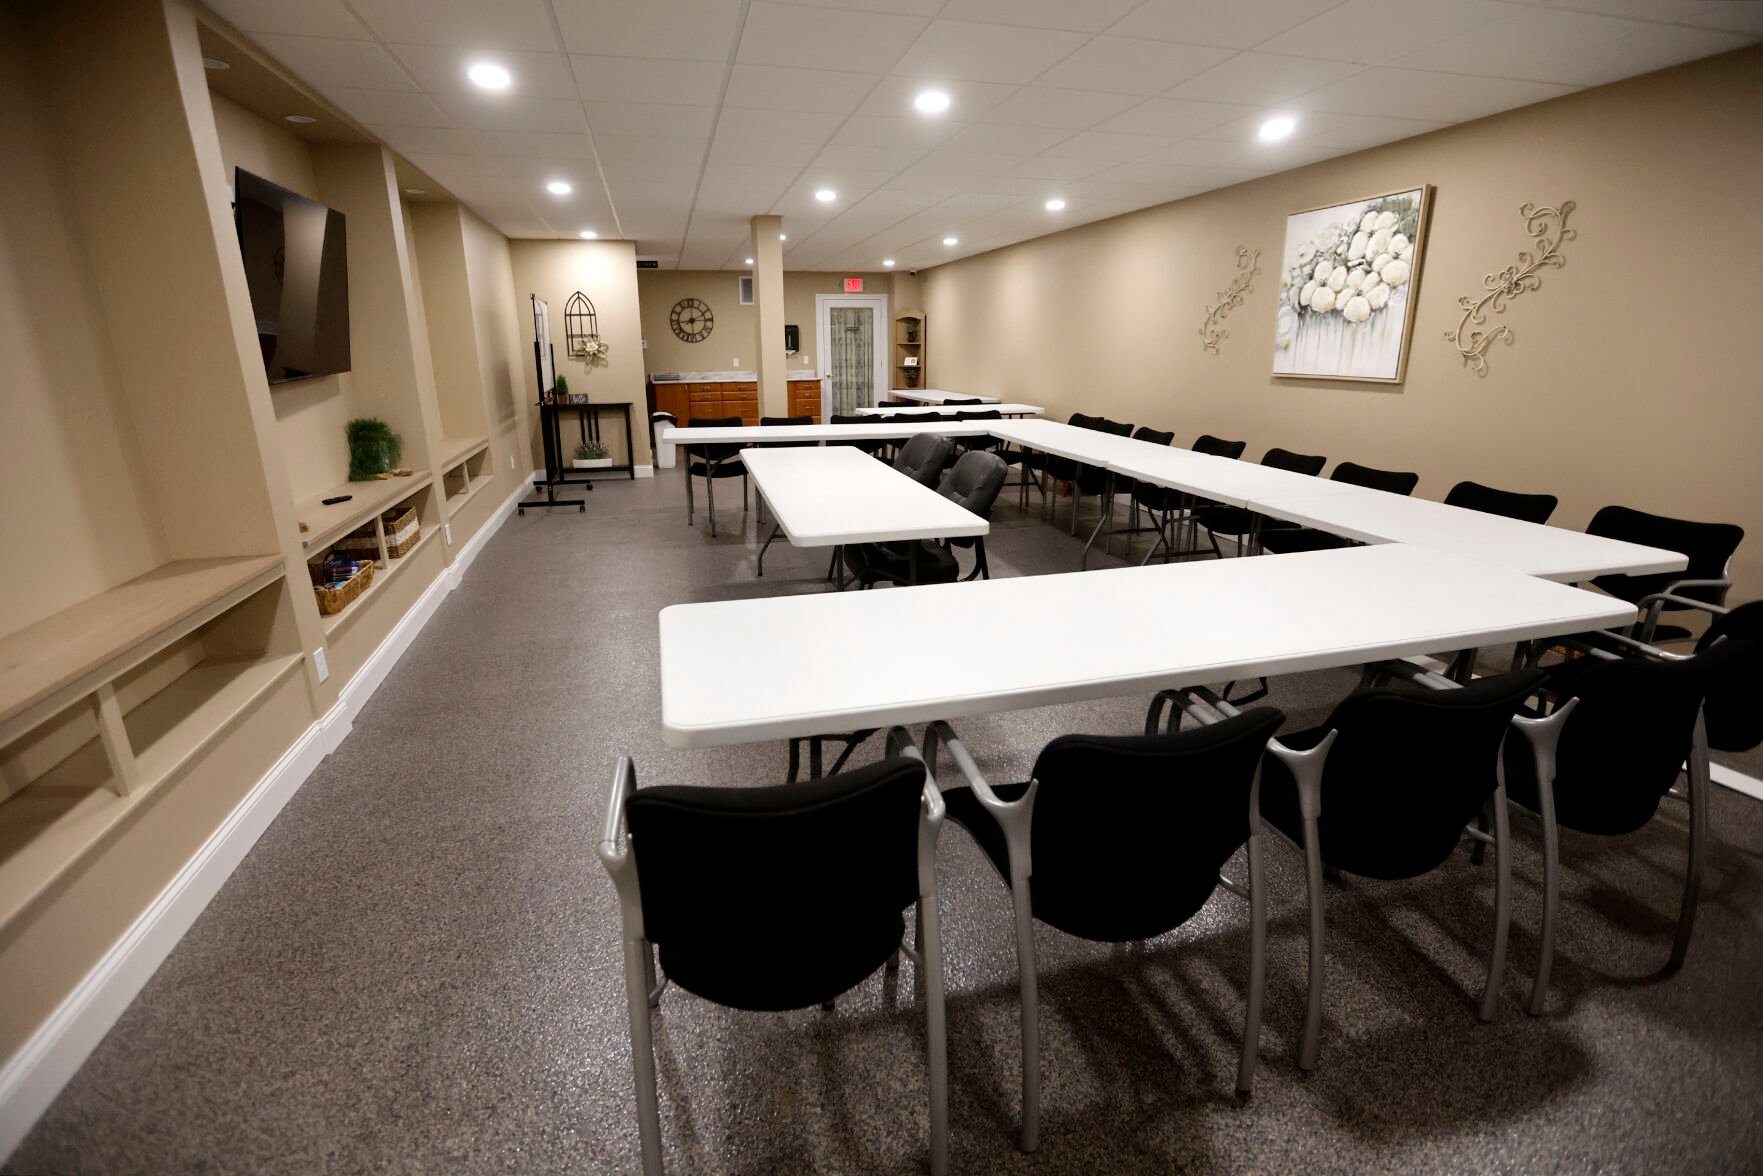 A conference room at The Bread Basket in Manchester, Iowa.    PHOTO CREDIT: JESSICA REILLY